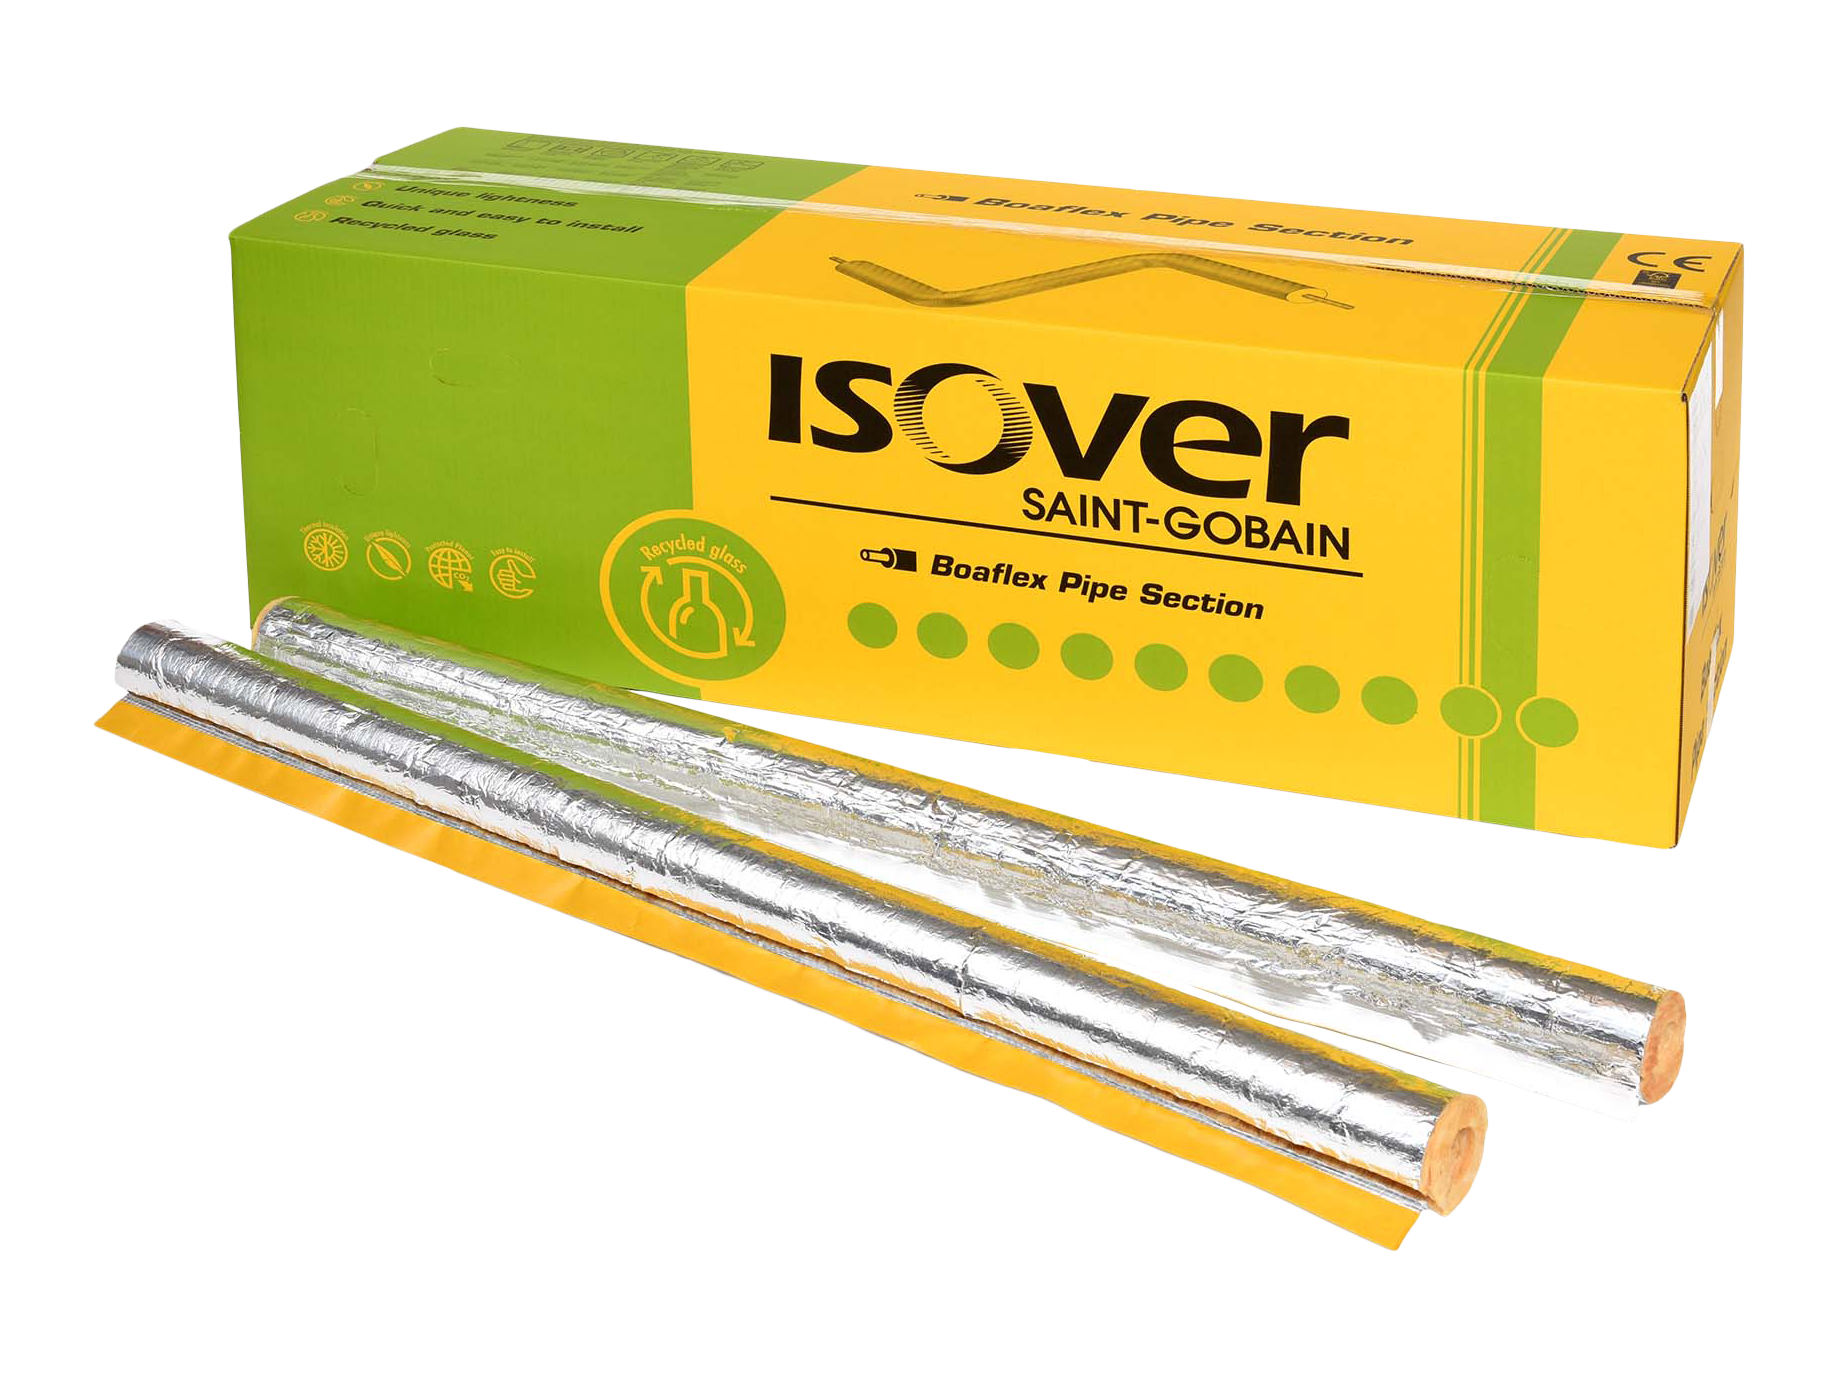 ISOVER Boaflex Pipe Section 42/60